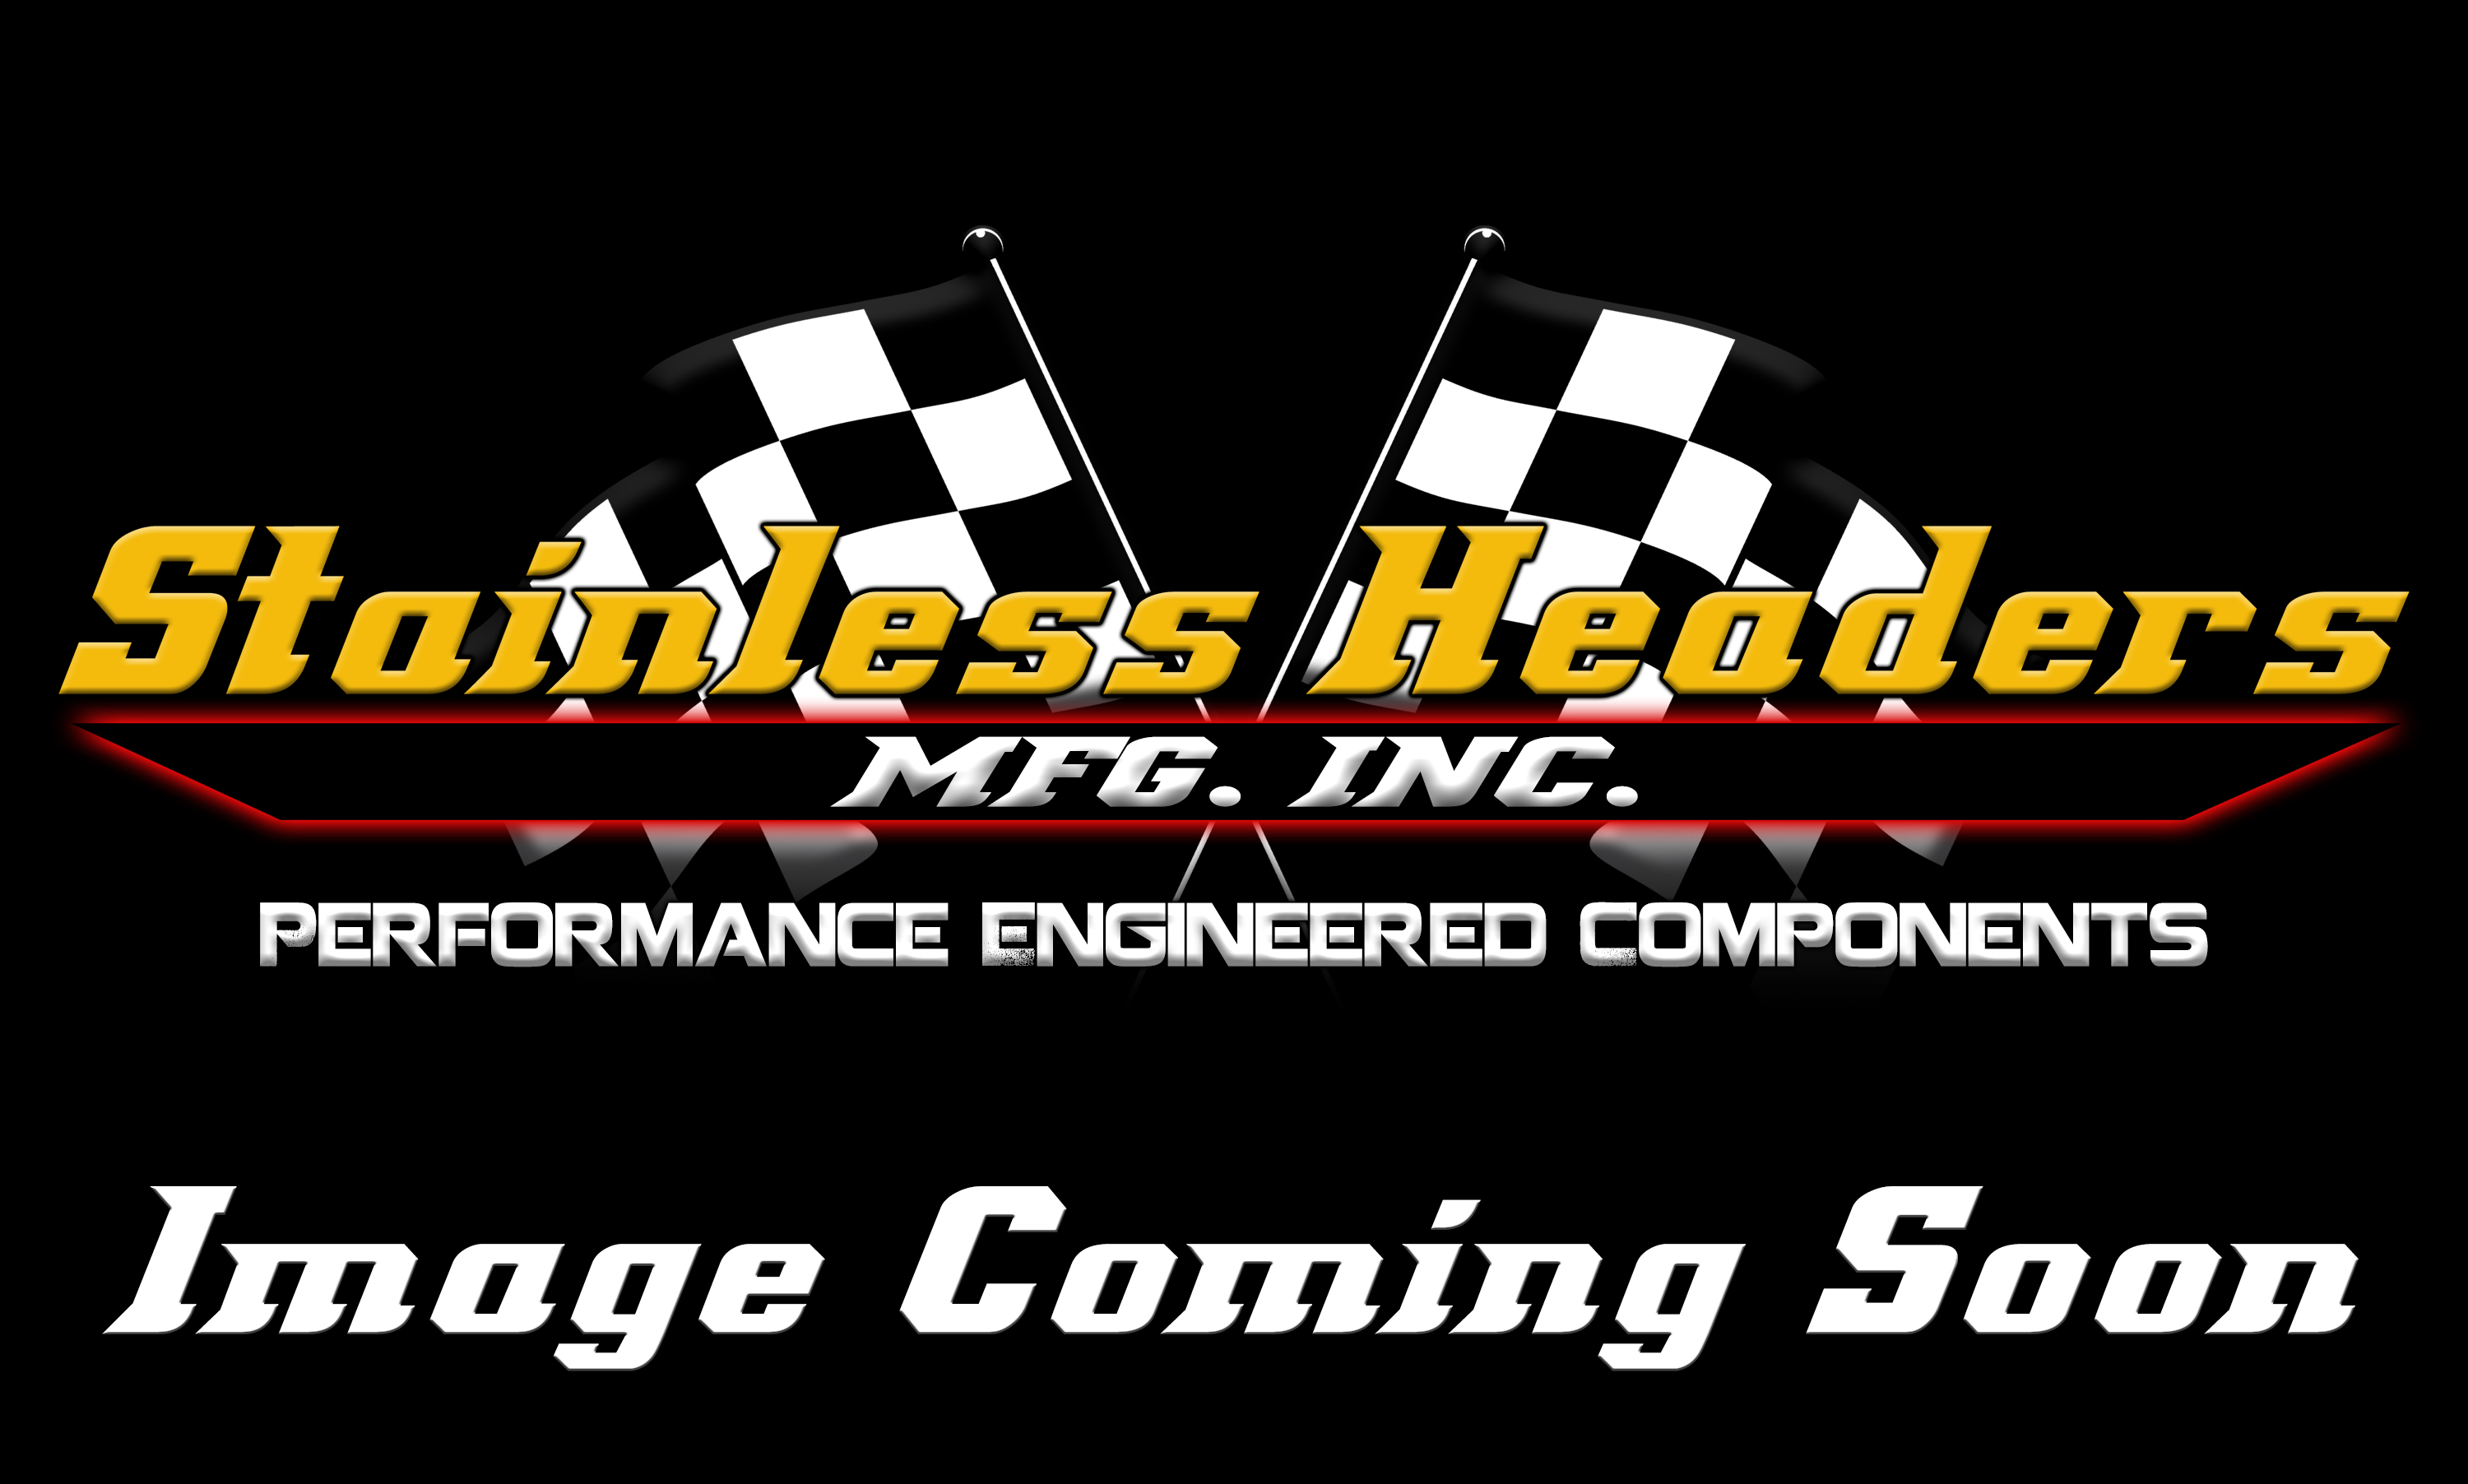 Forced Induction - Performance Turbochargers - CompTurbo Technologies - CTR2871S-5147 Oil-Less 3.0 Turbocharger (600 HP)